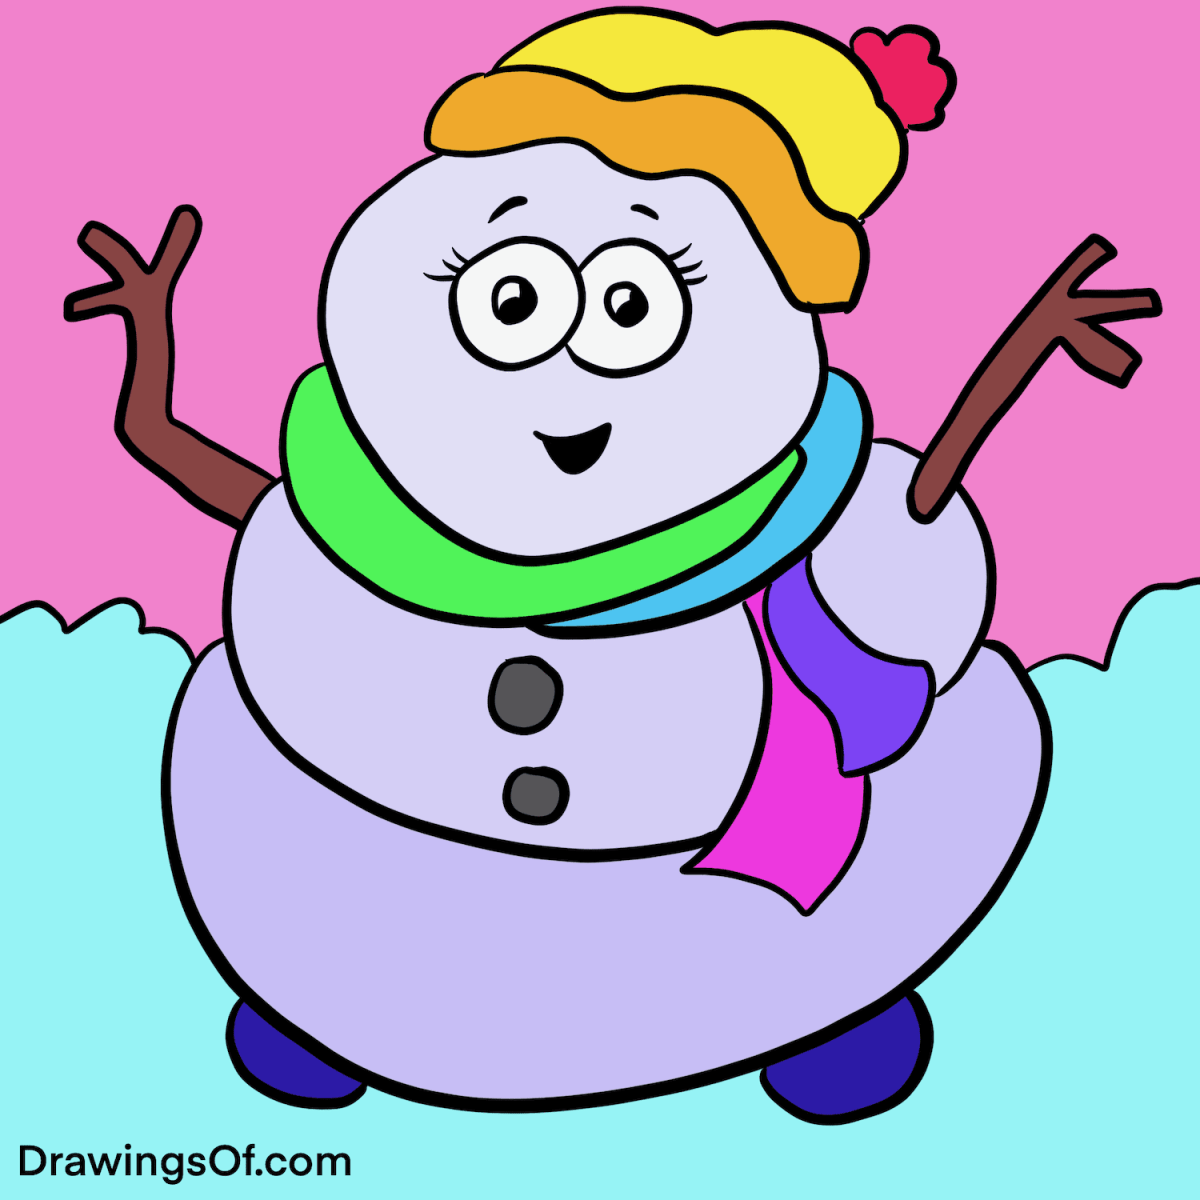 Snowman drawing cute easy instructions